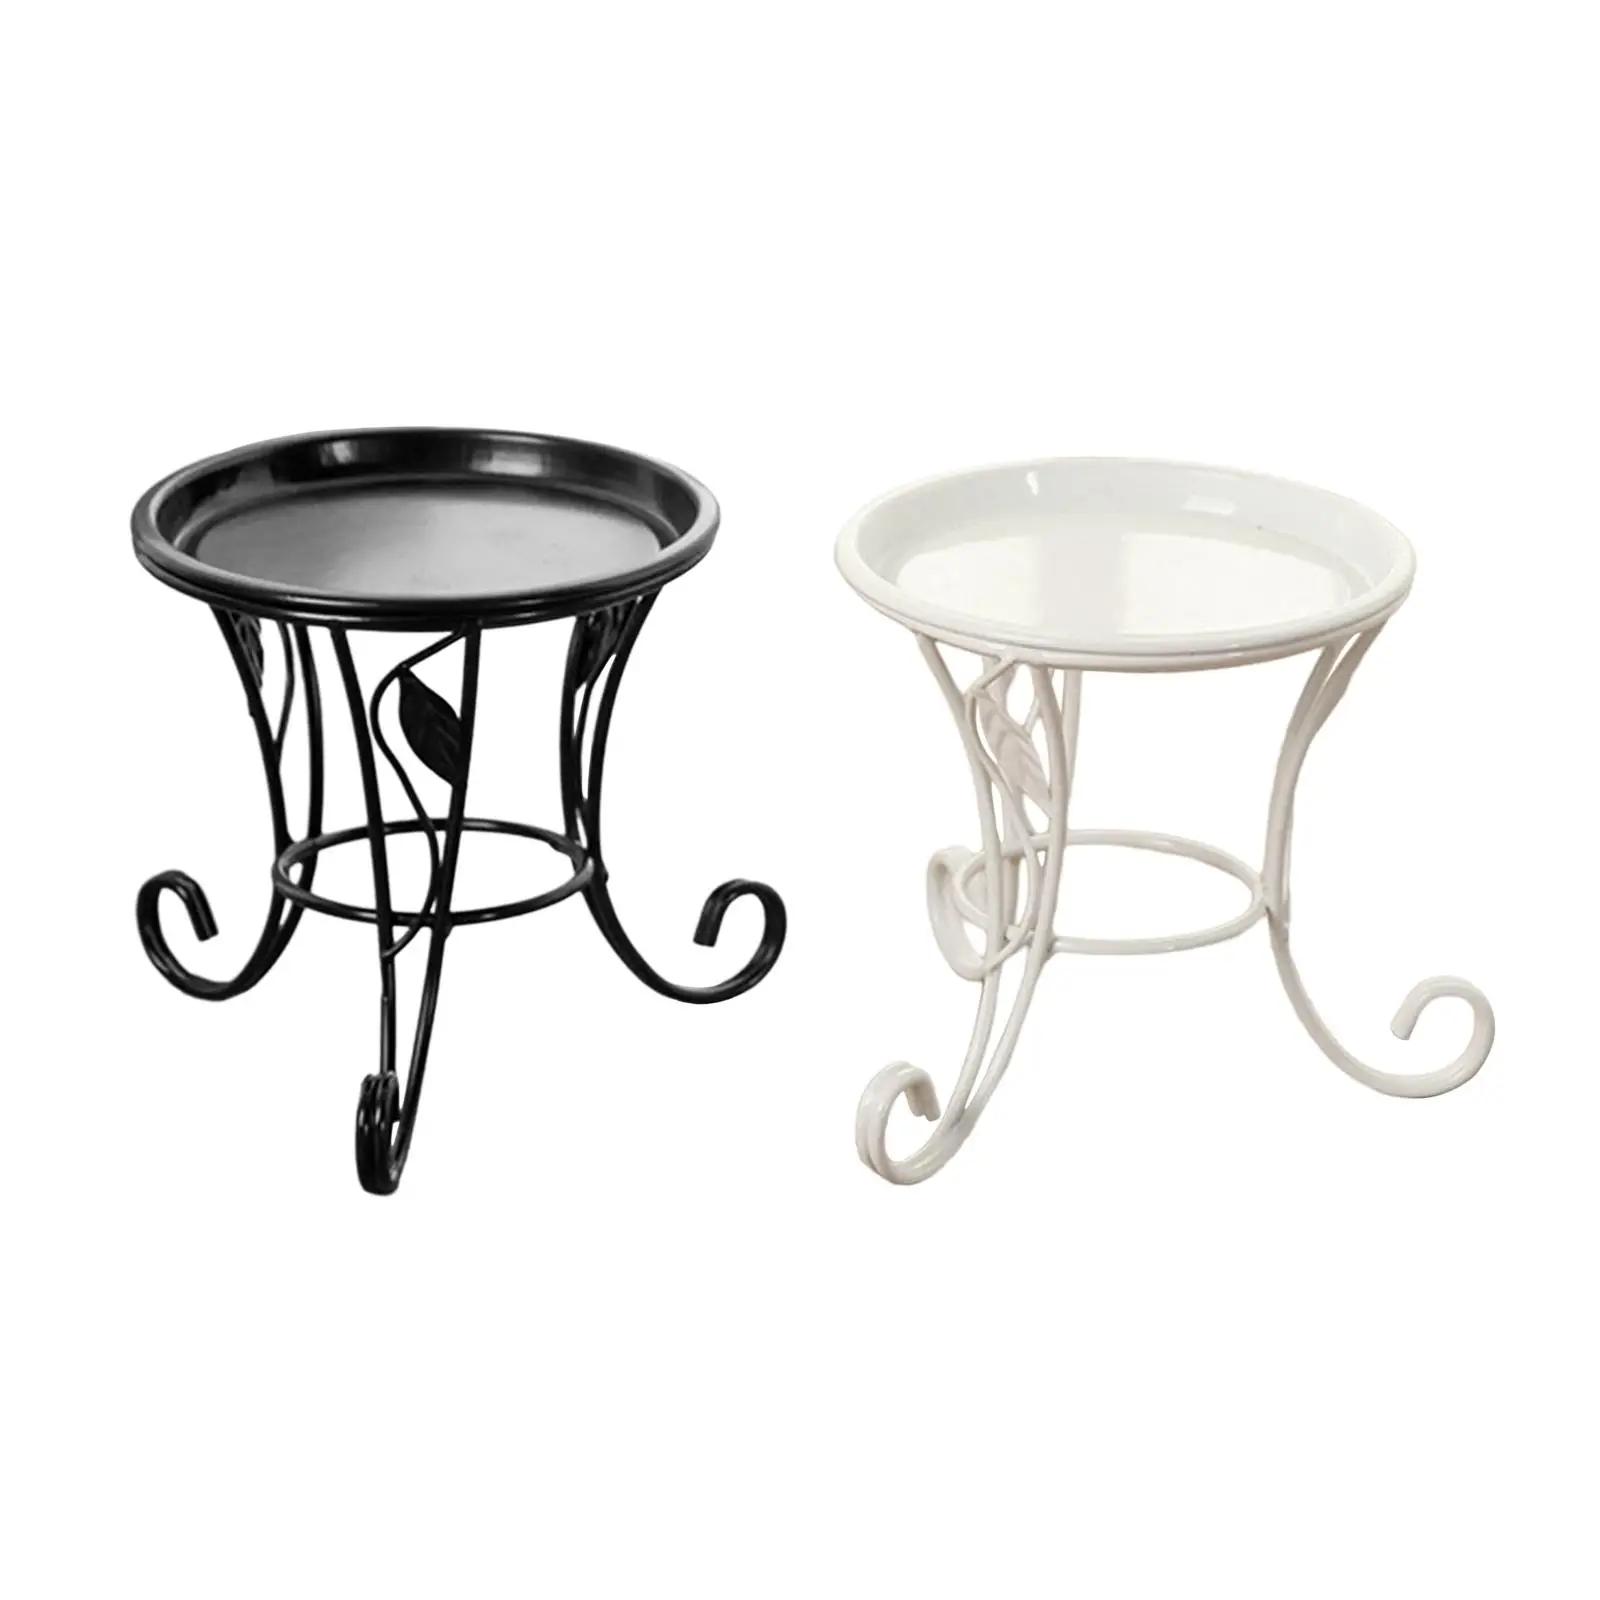 Plant Stand Decoration Stable Round Metal Plant Stand Shelf Flower Pot Holder Rack for Office Indoor Living Room Bal